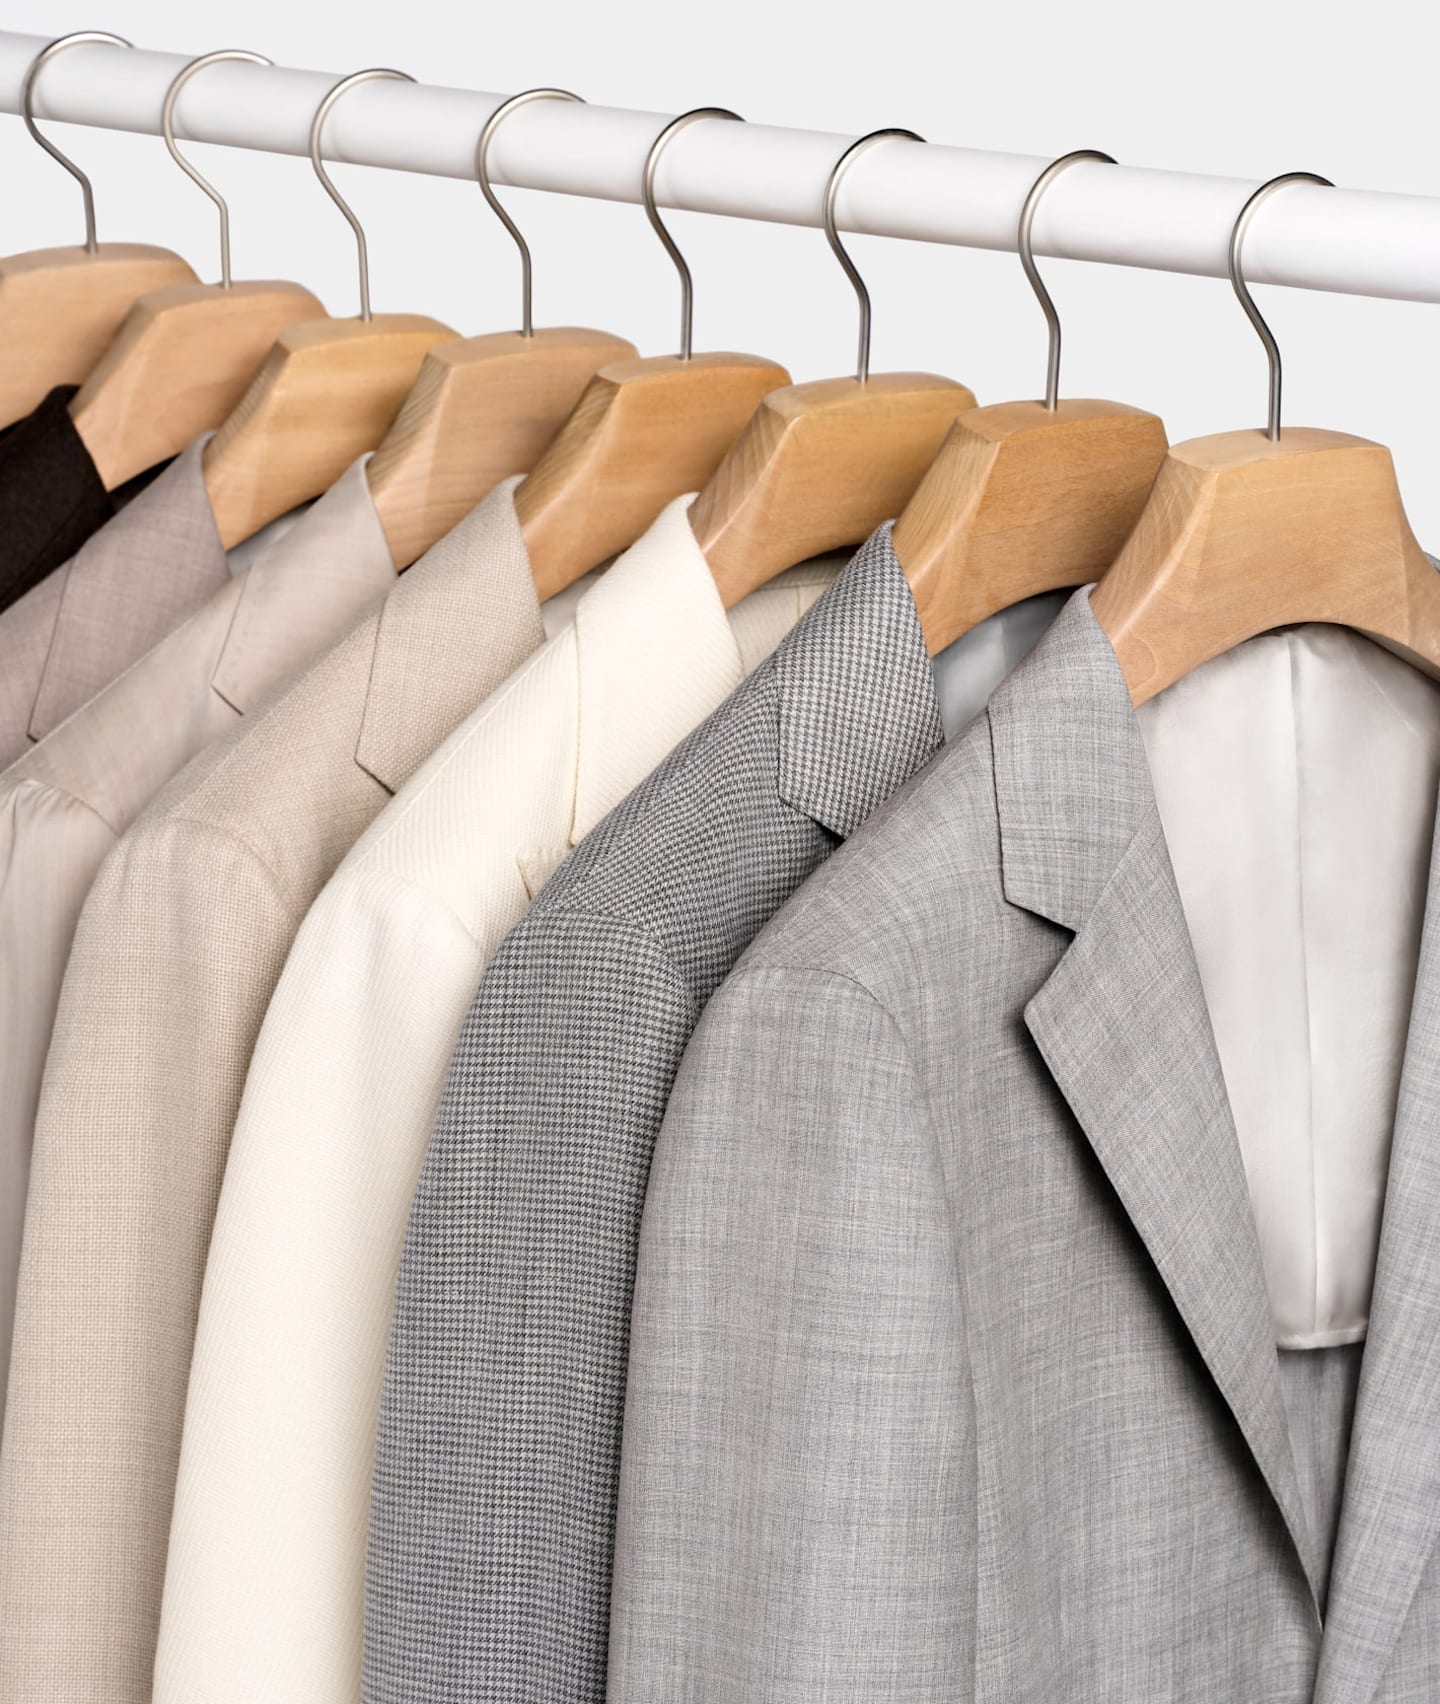 Rack with hanging light grey, checked, and light brown suit jackets.